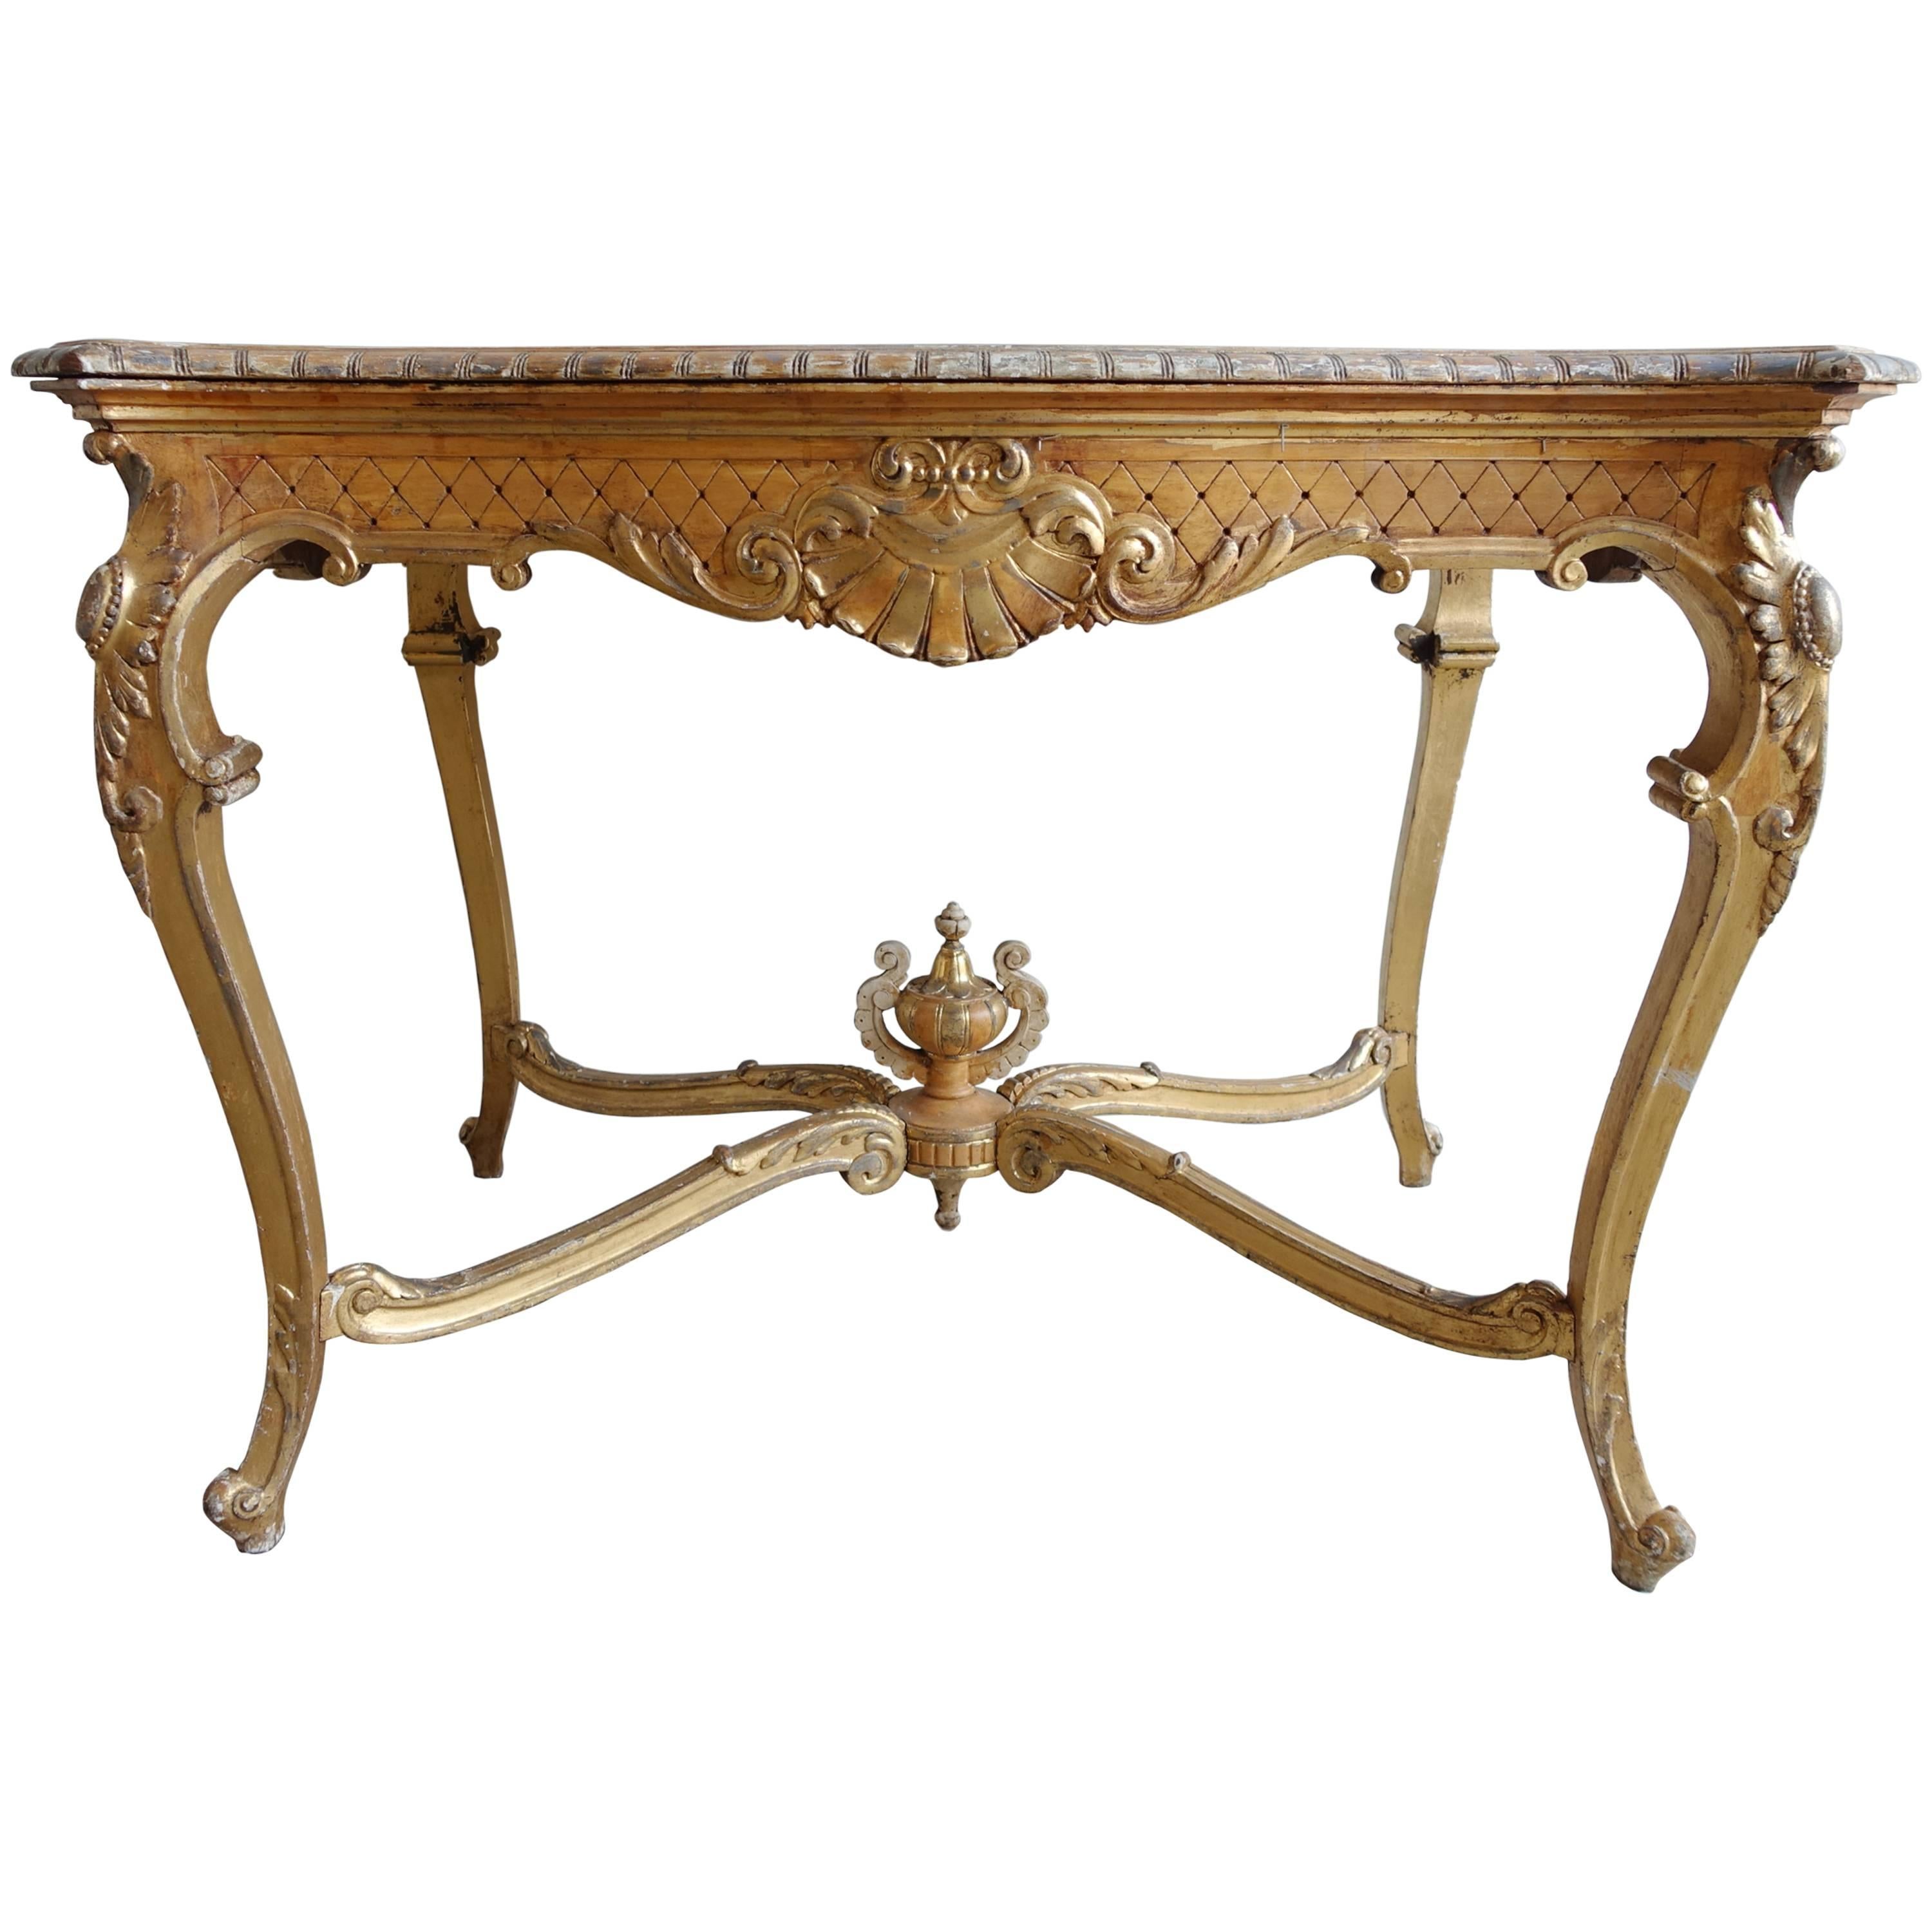 19th Century French Giltwood Table with Center Urn and Shell Design